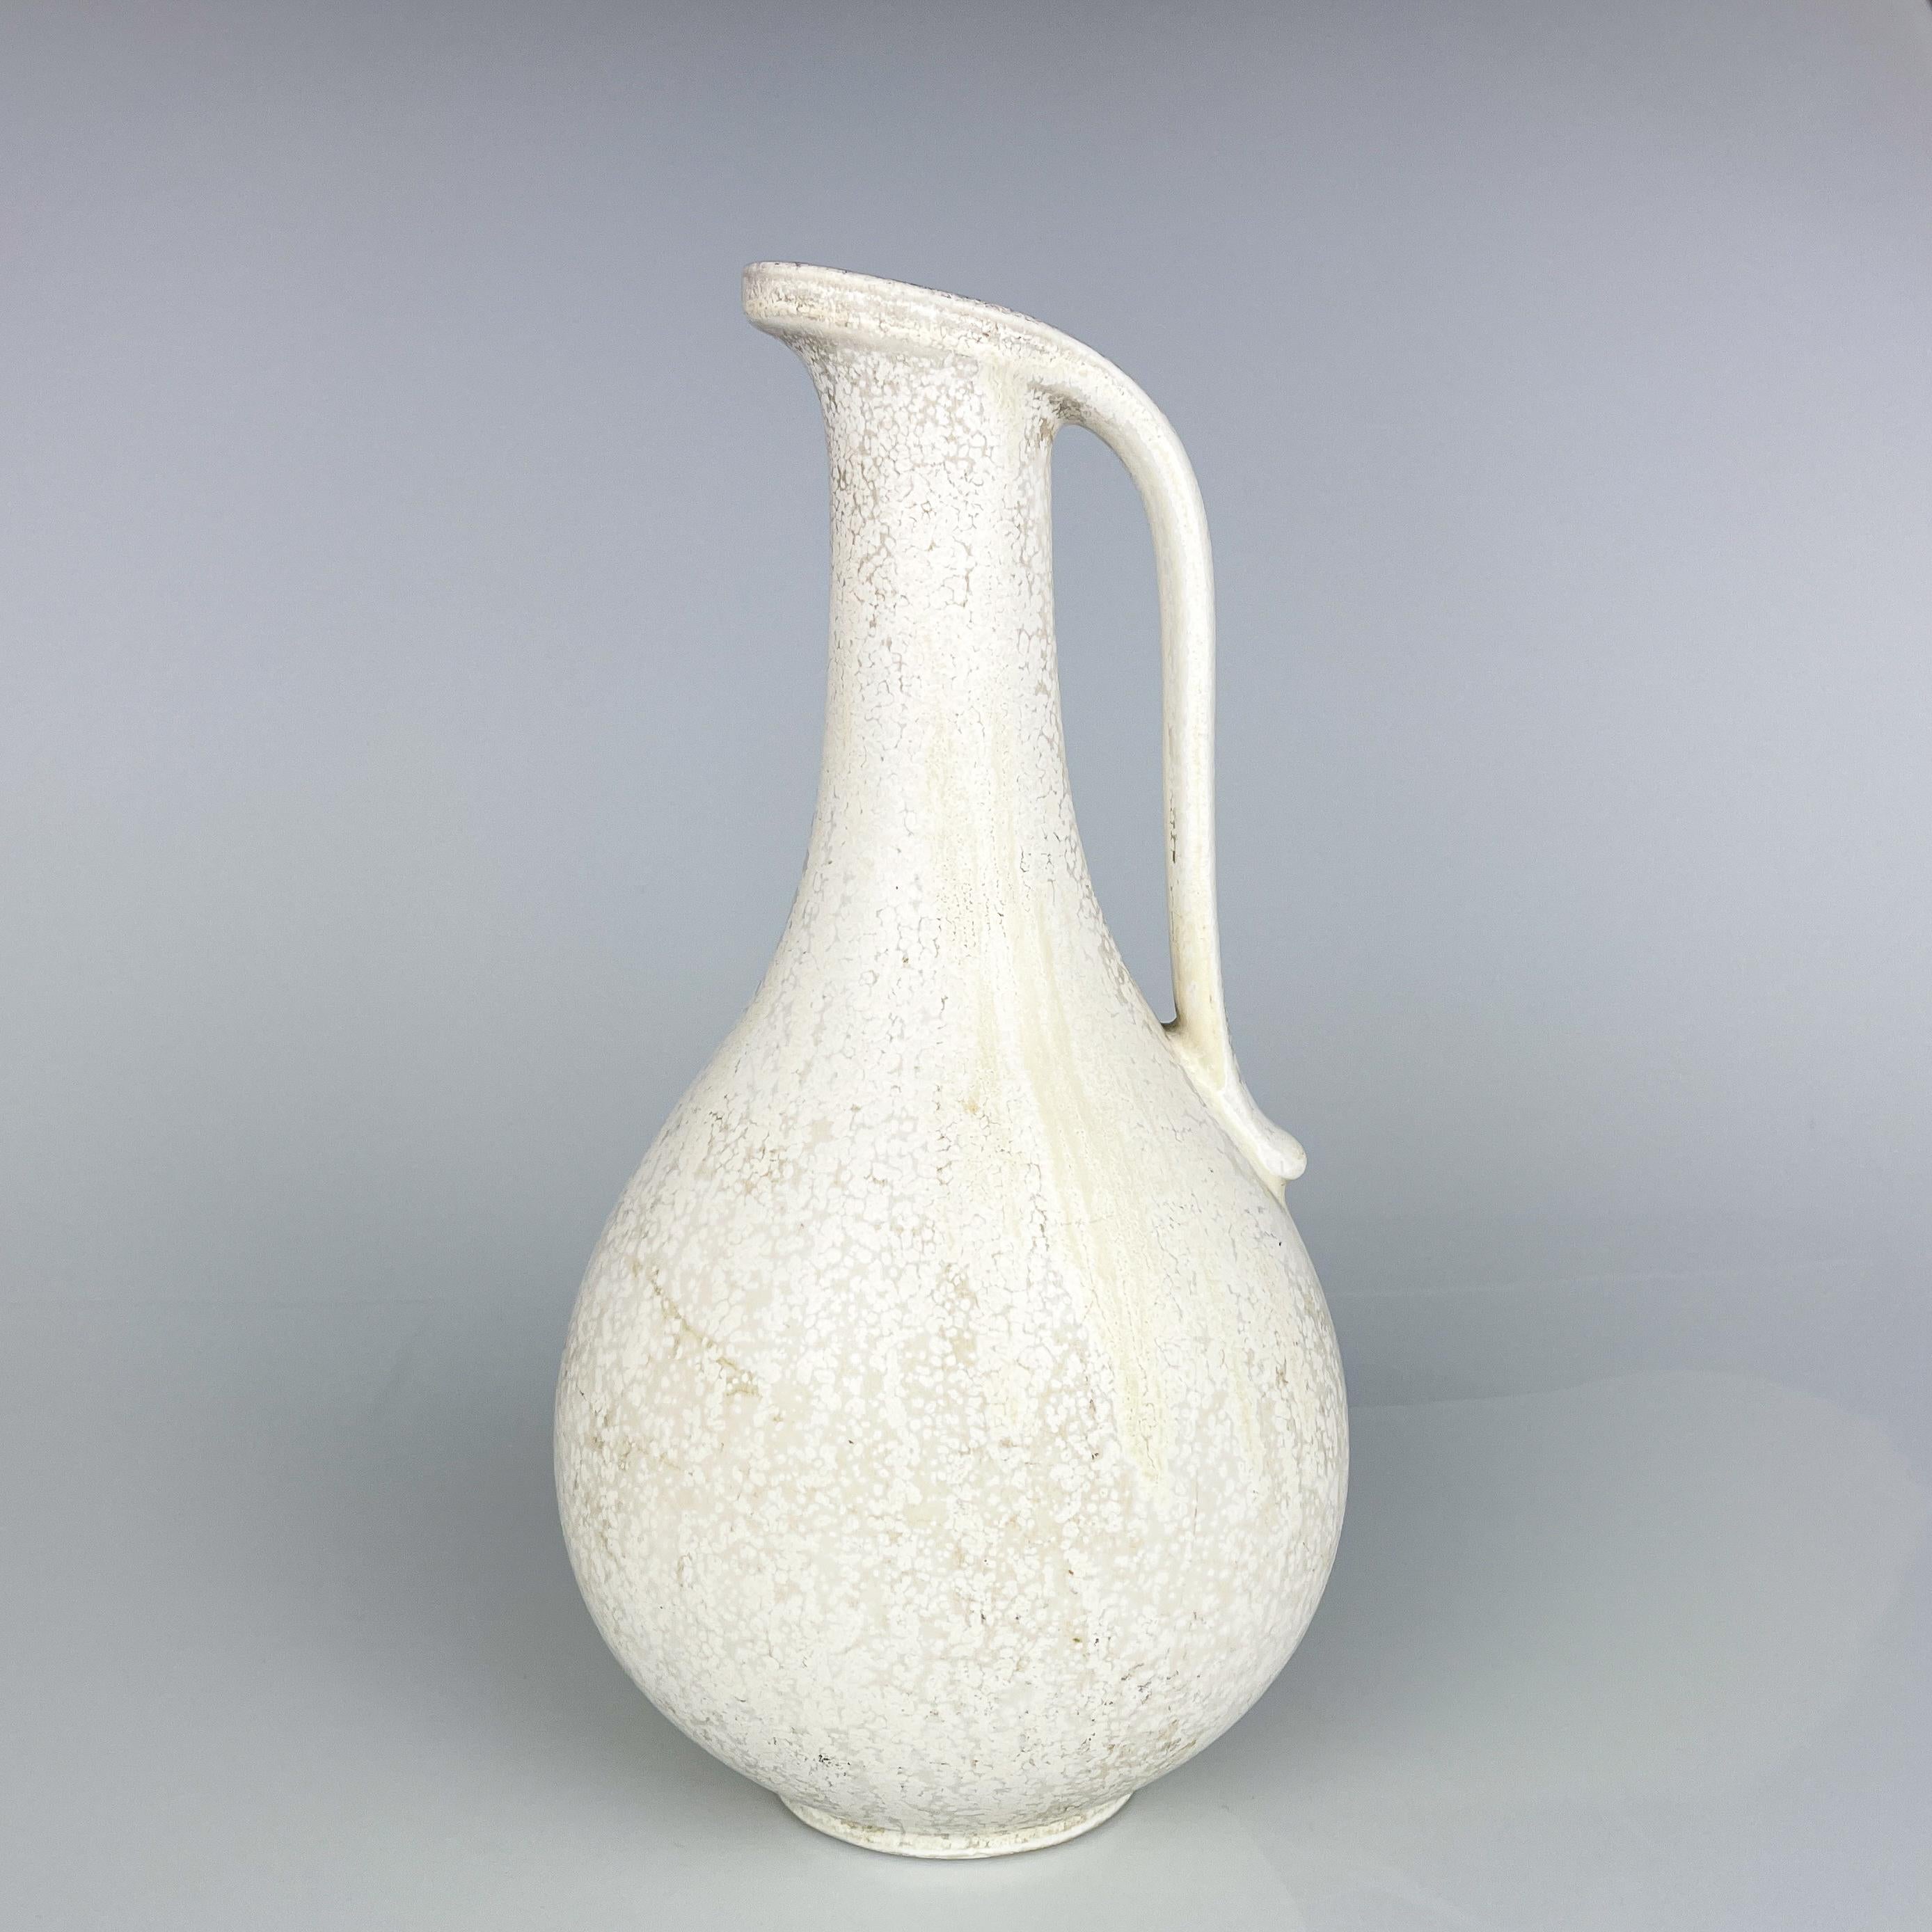 Gunnar Nylund, Stoneware vase /pitcher Rörstrand, Sweden, circa 1950

Description
A stoneware vase/pitcher, finished with a beautiful white “eggshell” glaze.

This object was designed by Gunnar Nylund and executed by the Swedish ceramics factory